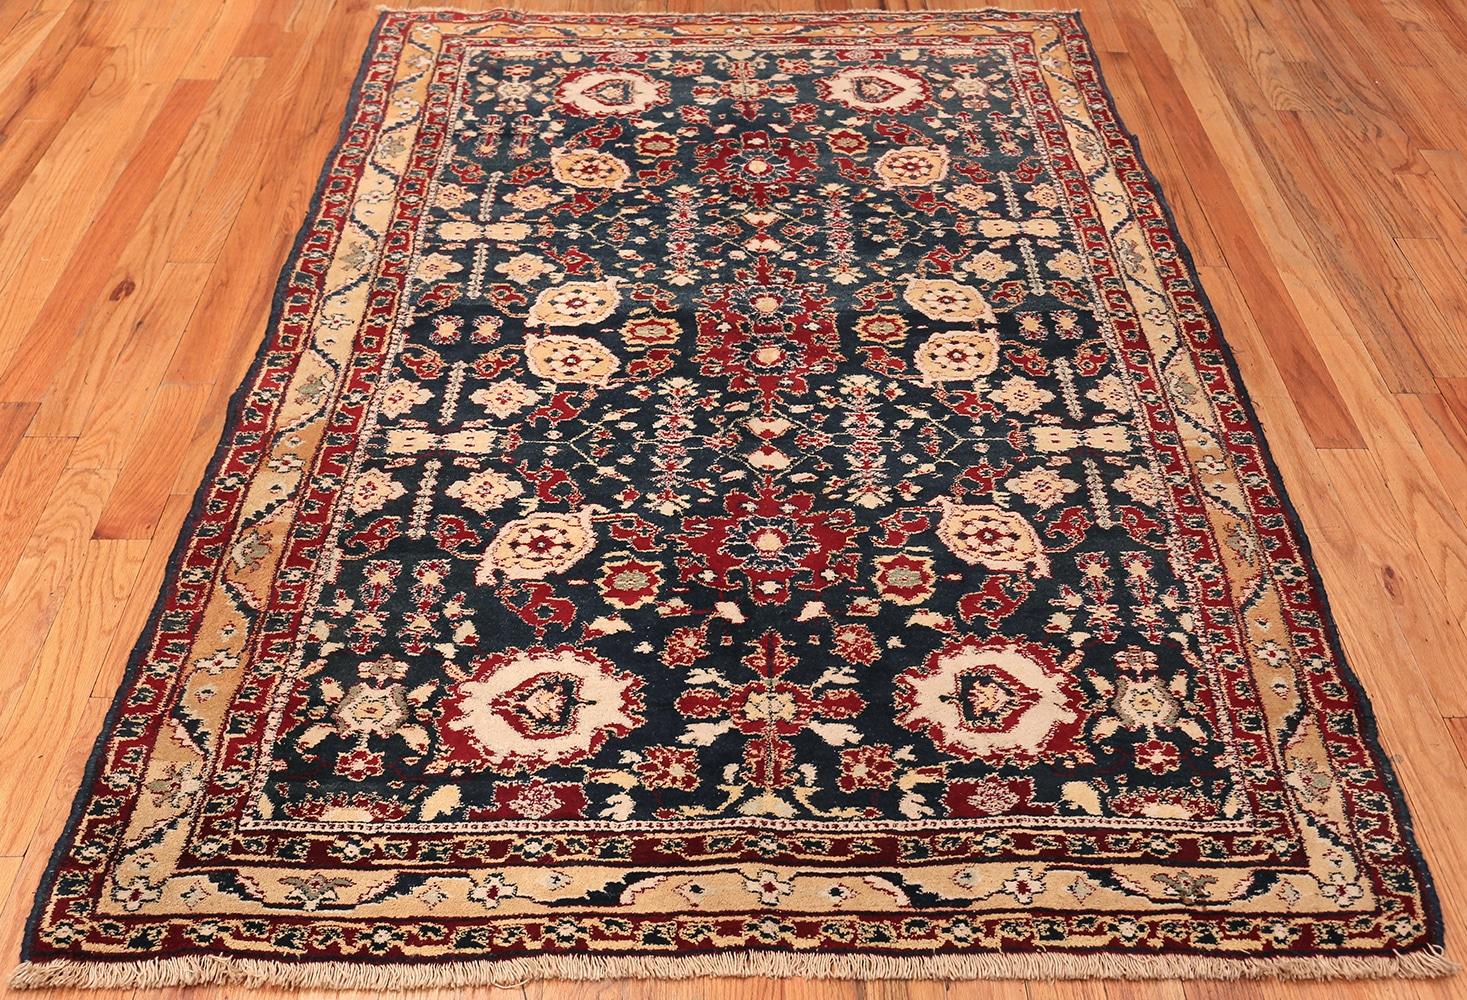 A Beautiful Blue Color Background Small Size Antique Agra Rug, Origin: India, Circa: 1920 – This gorgeous Indian Agra rug from the 1920s is a bright and colorful addition to traditional or contemporary décor styles. The brilliant reds and blues are